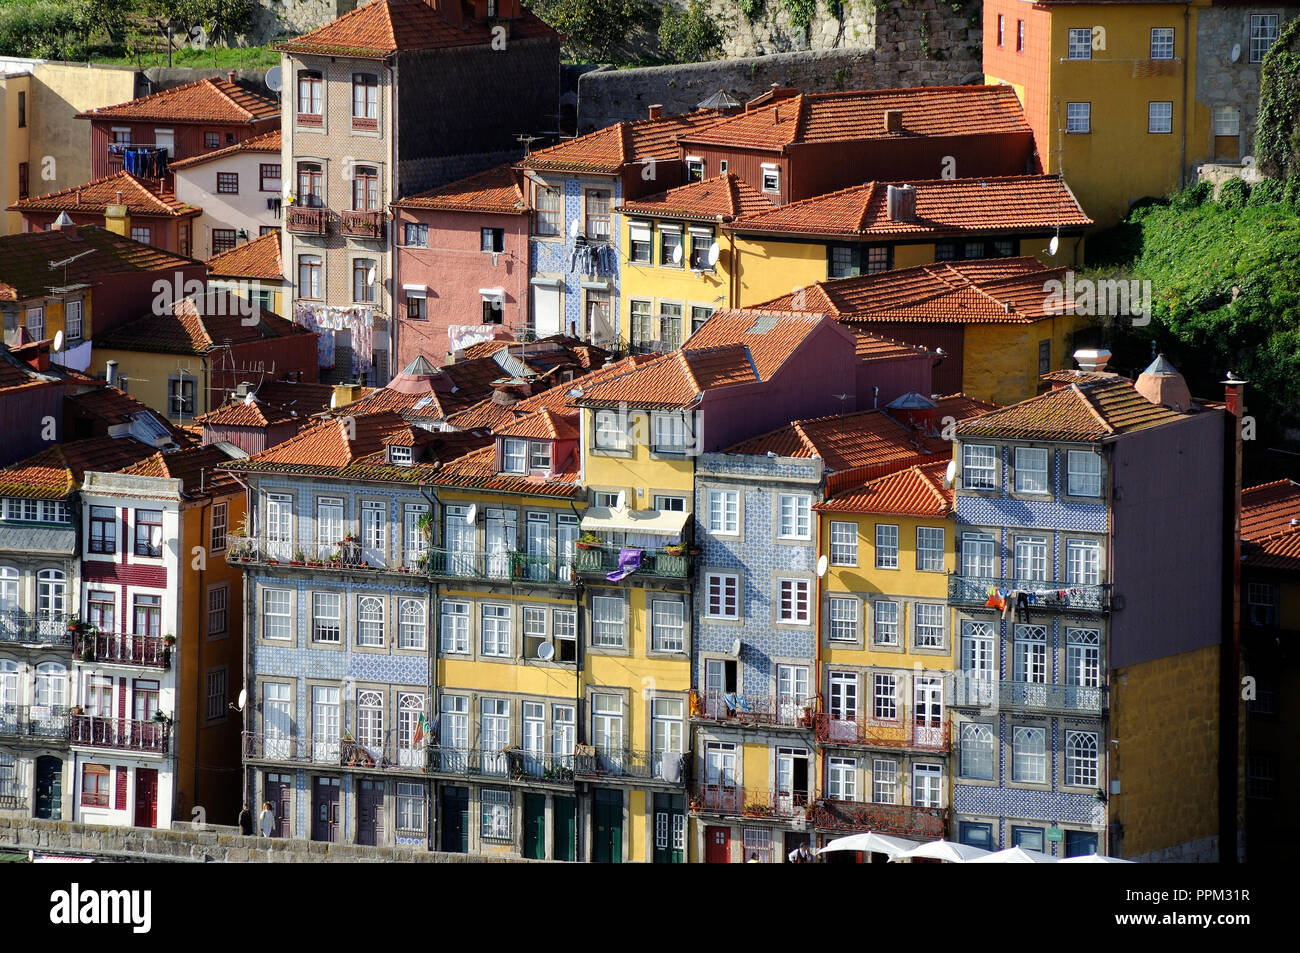 Oporto, capital of the Port wine, and the Ribeira quarter, a UNESCO World Heritage Site, Portugal Stock Photo